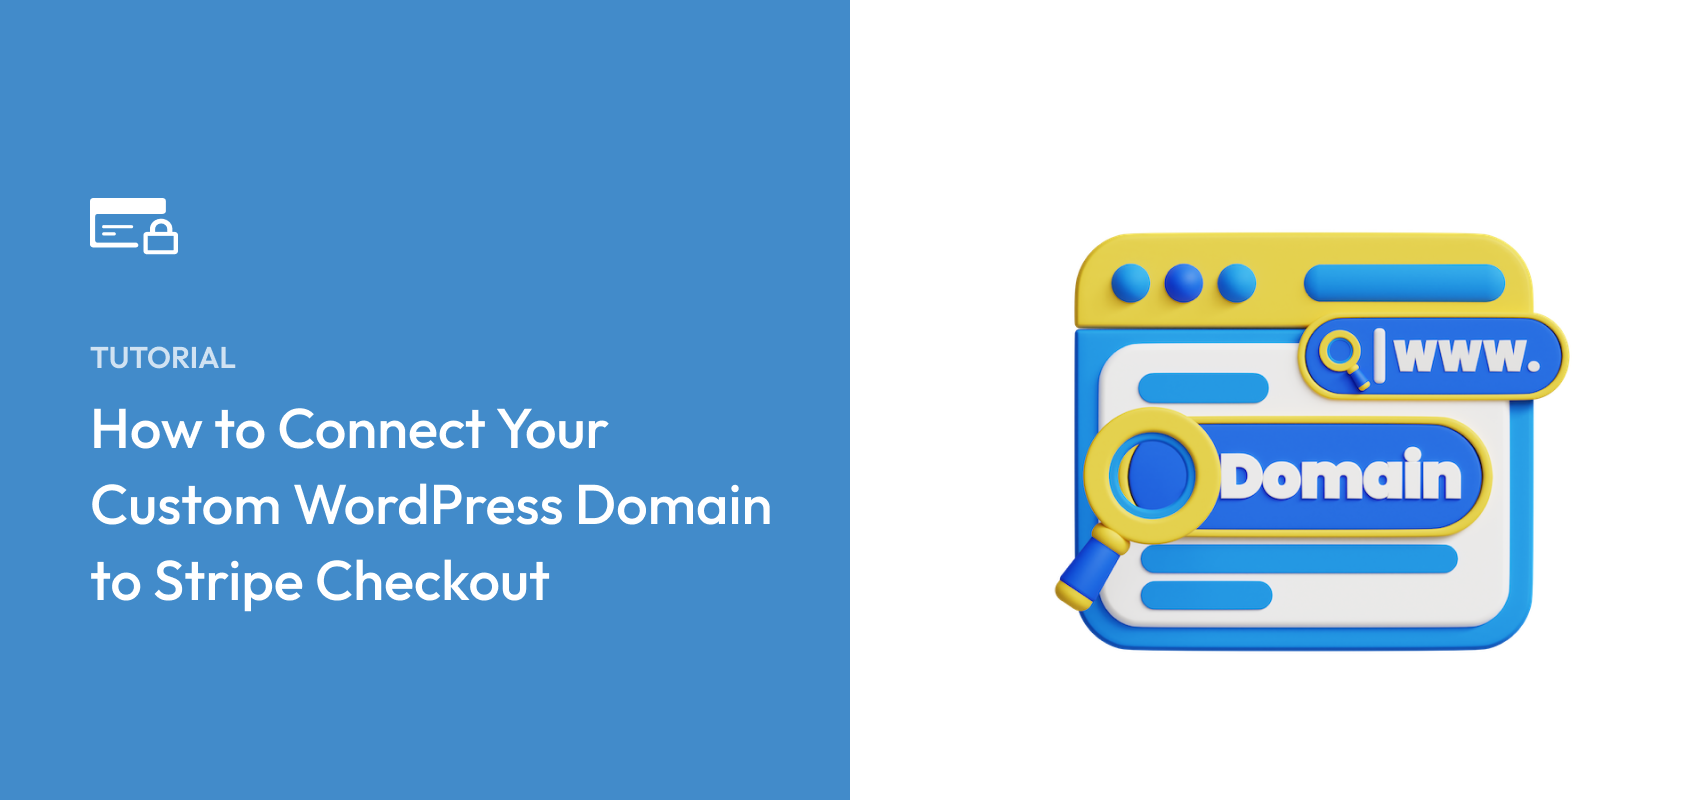 How to Connect Your Custom WordPress Domain to Stripe Checkout